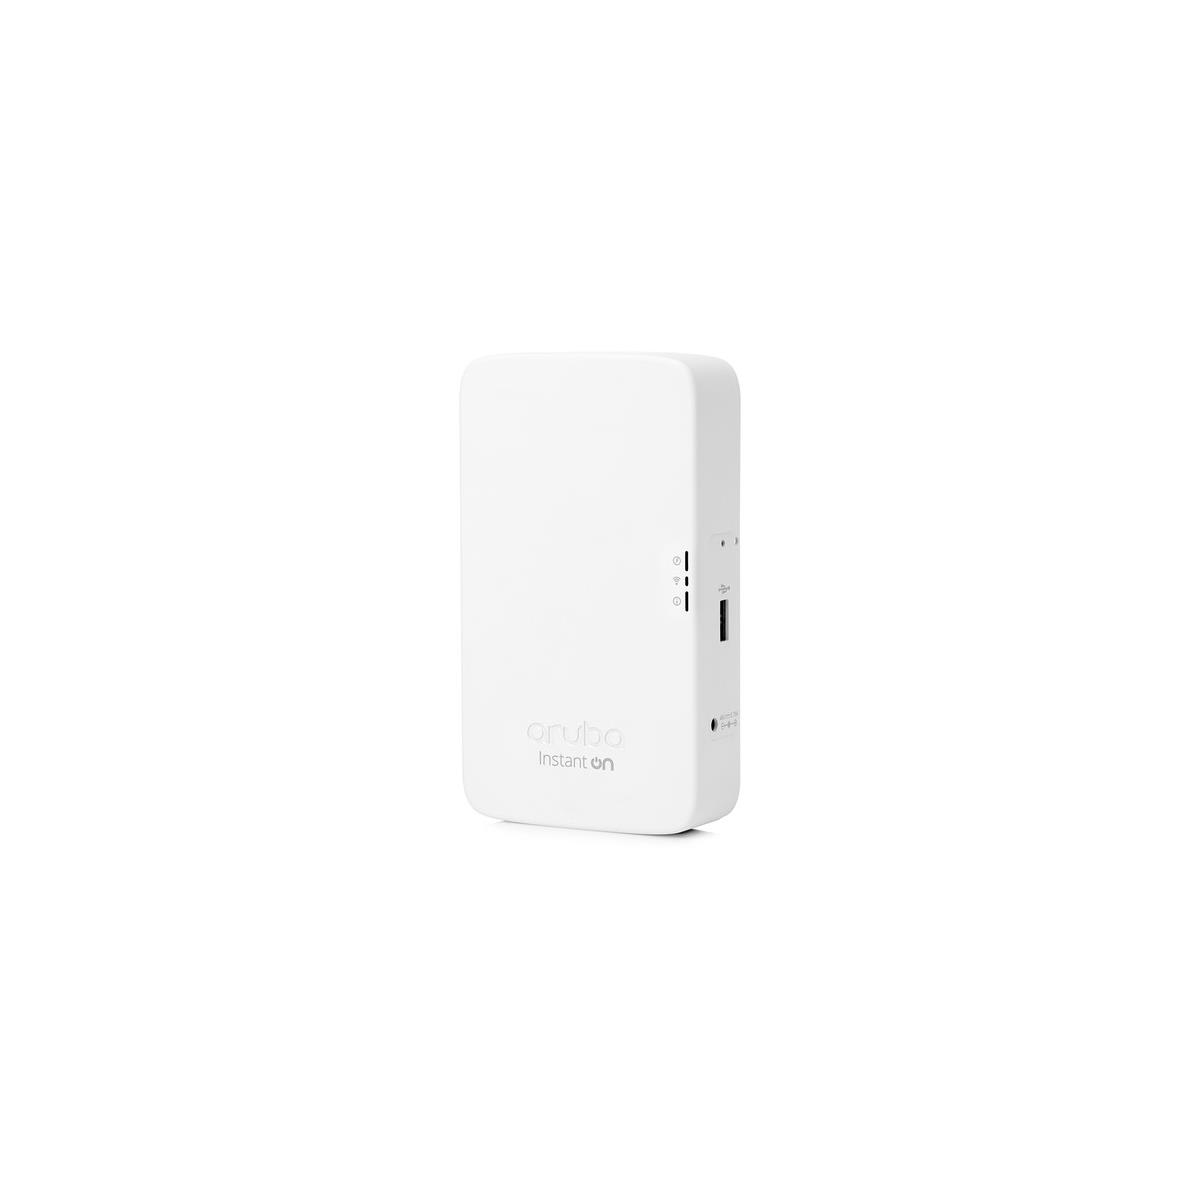 Image of Aruba Instant On AP11D Desk/Wall Access Point